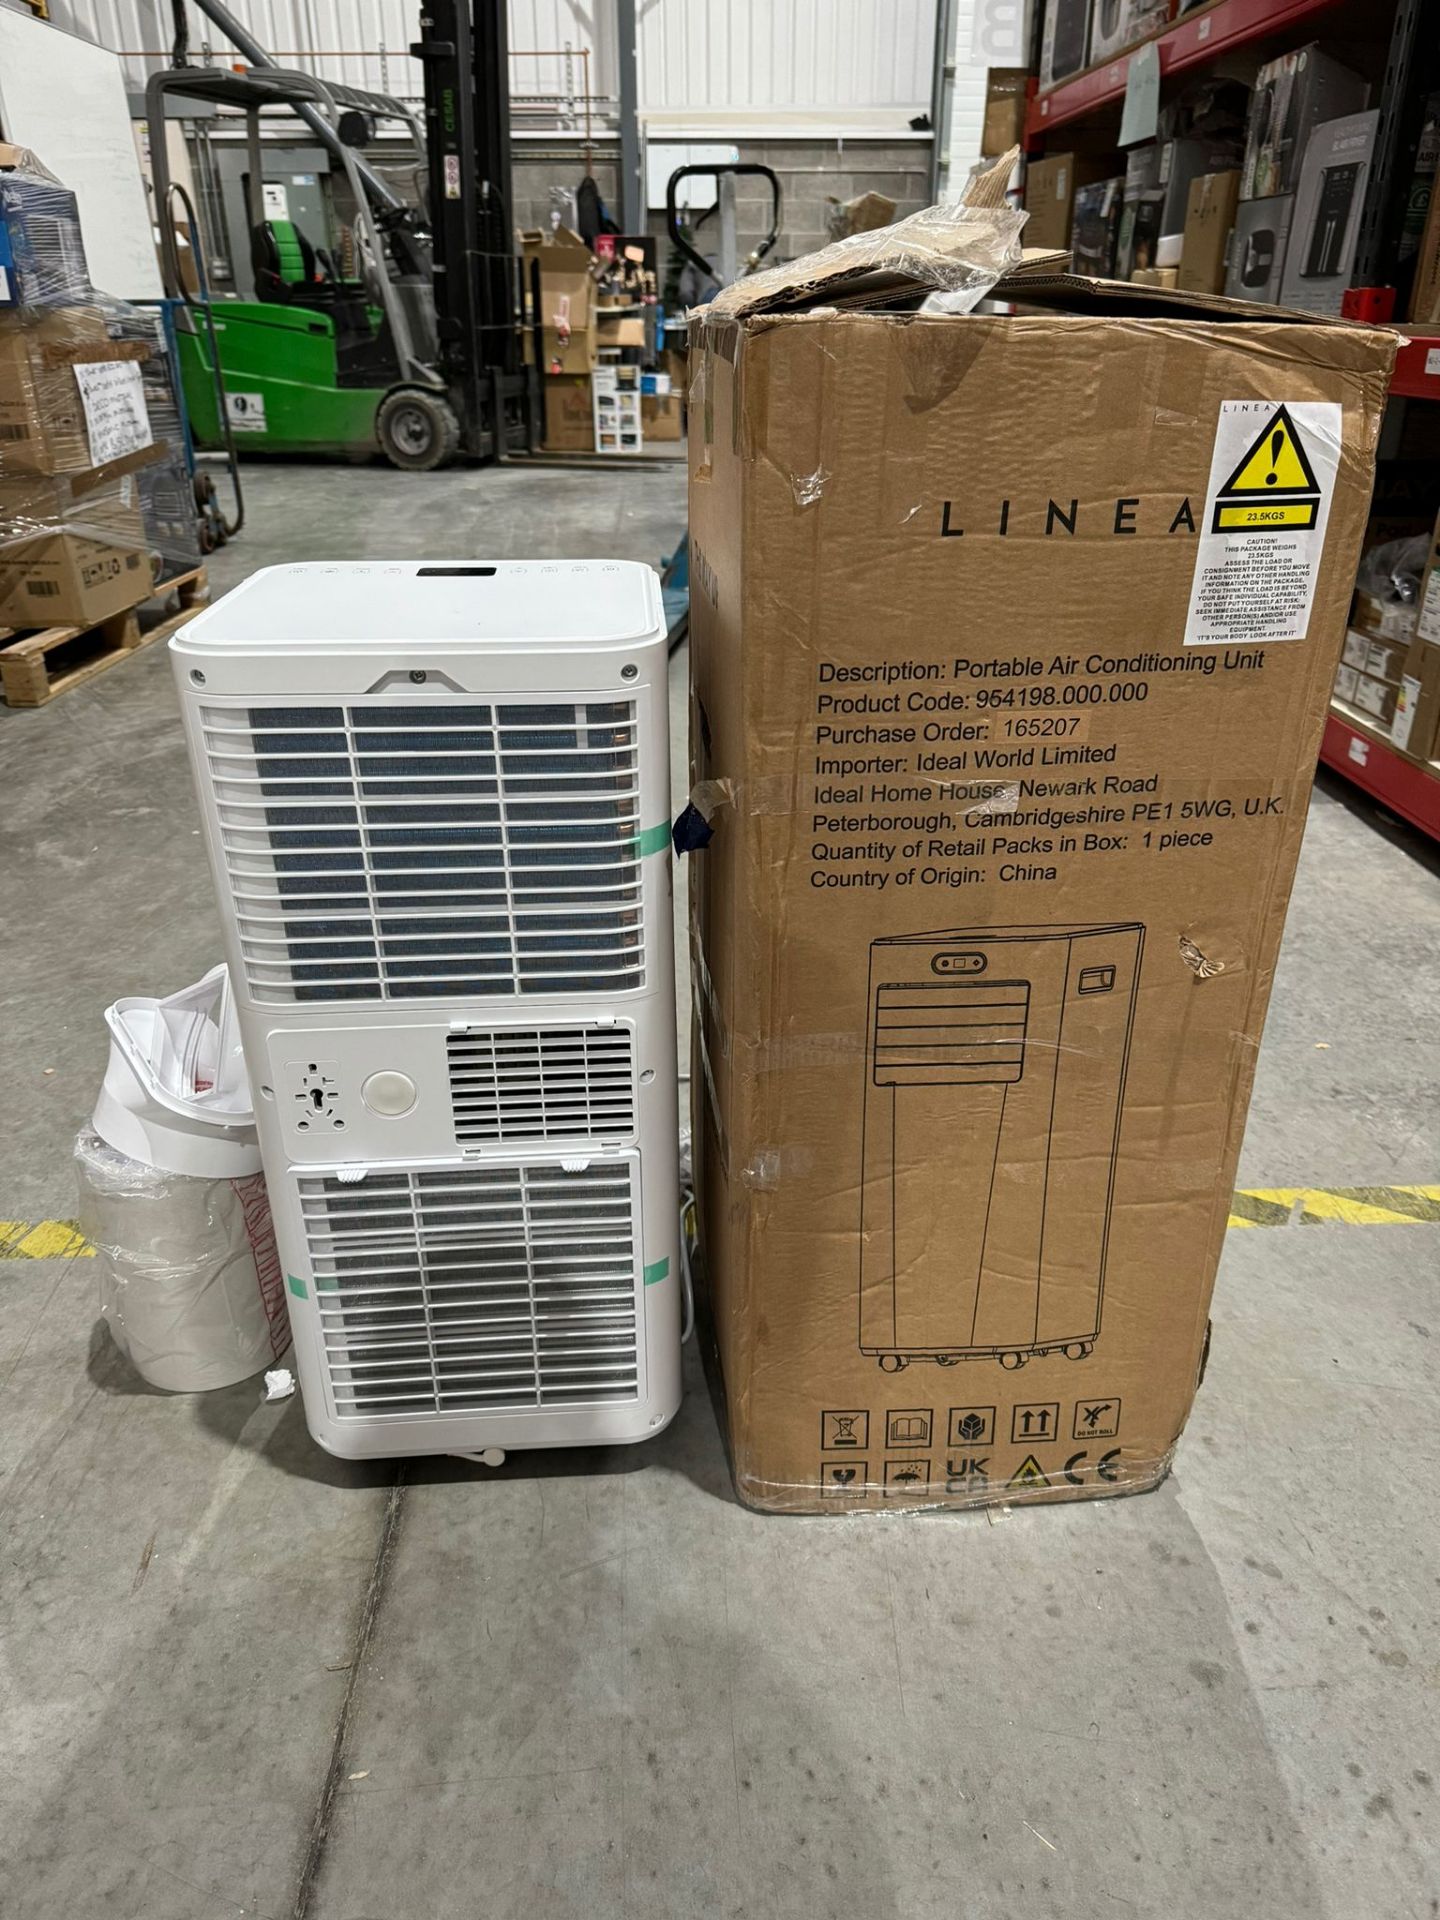 1 x LINEA Portable Air Conditioning Unit - 954198.000.000 with Window Kit - NO RESERVE - Image 3 of 8